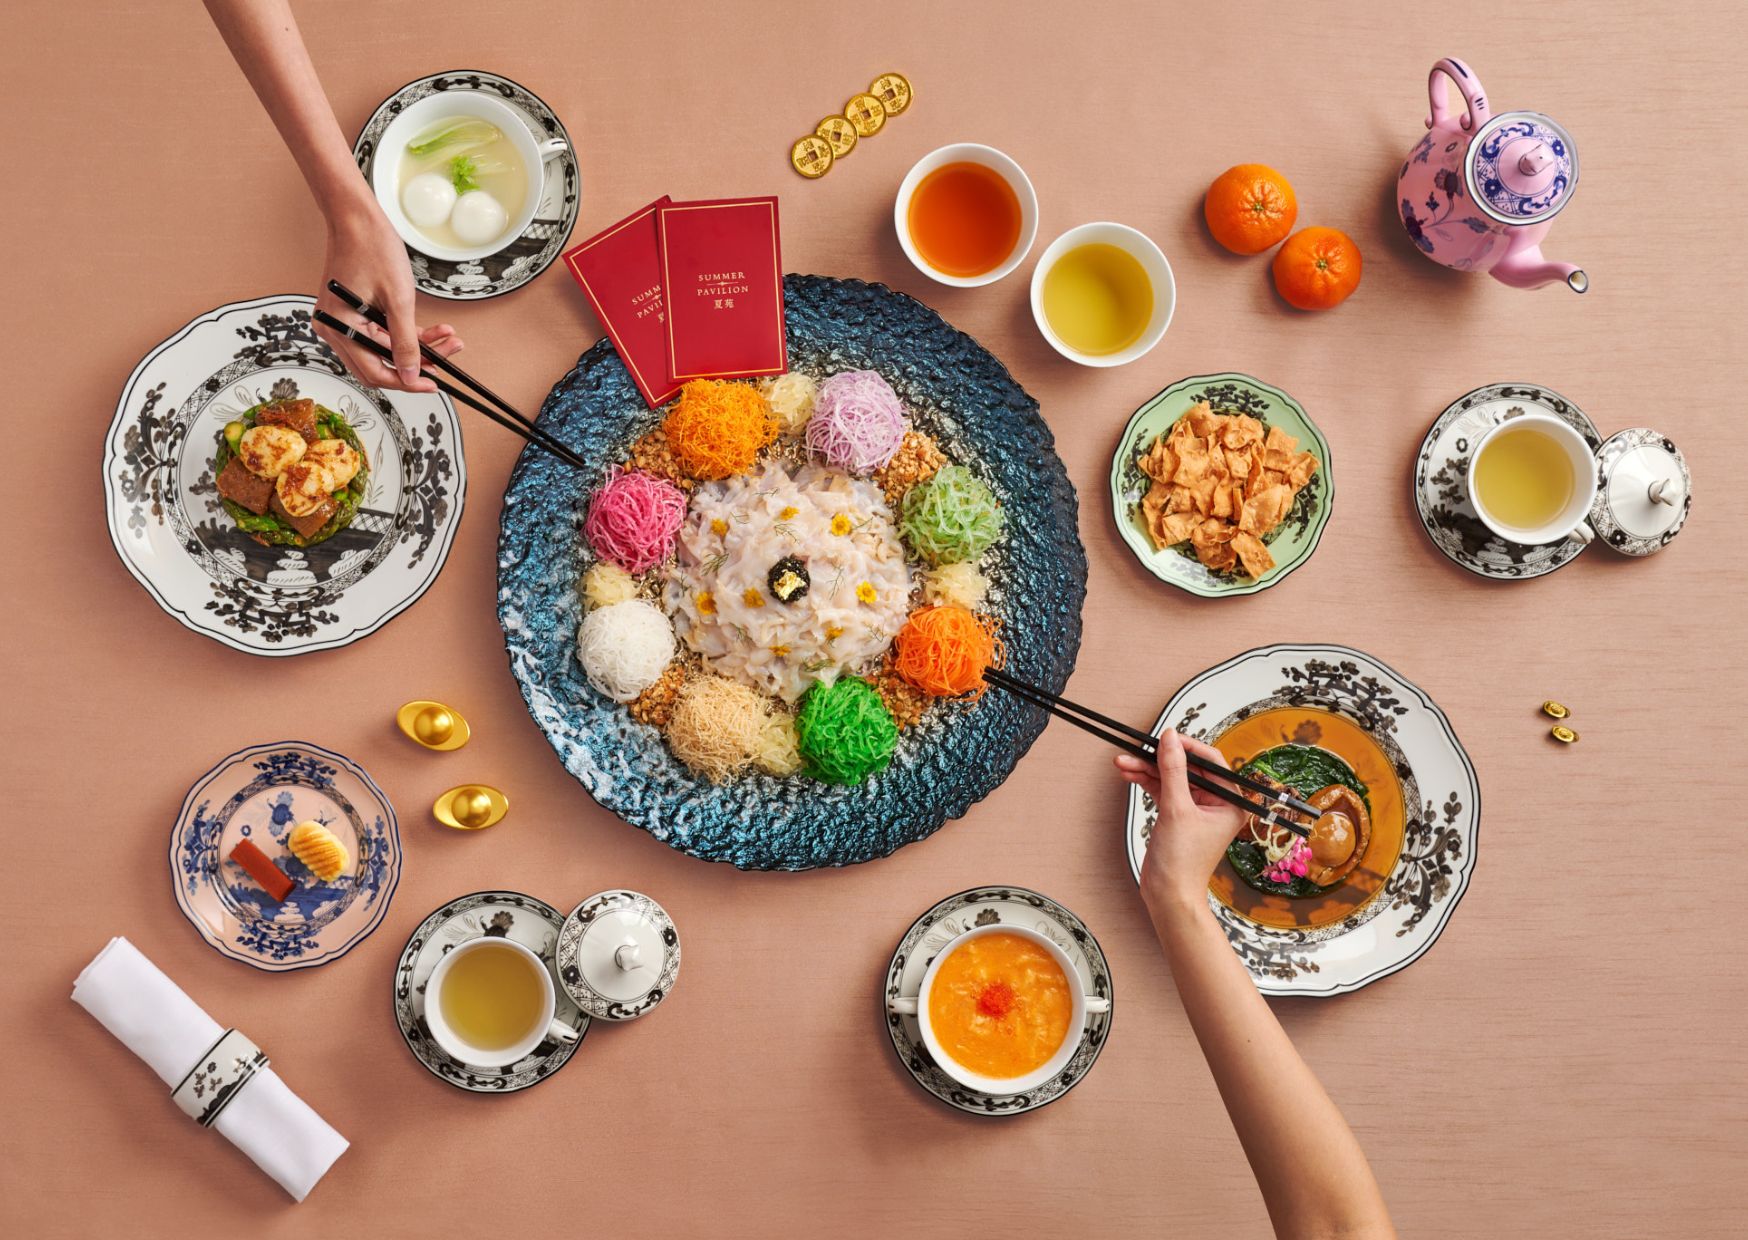 , Celebrate CNY 2024 with these auspicious yu shengs and prosperous feasts